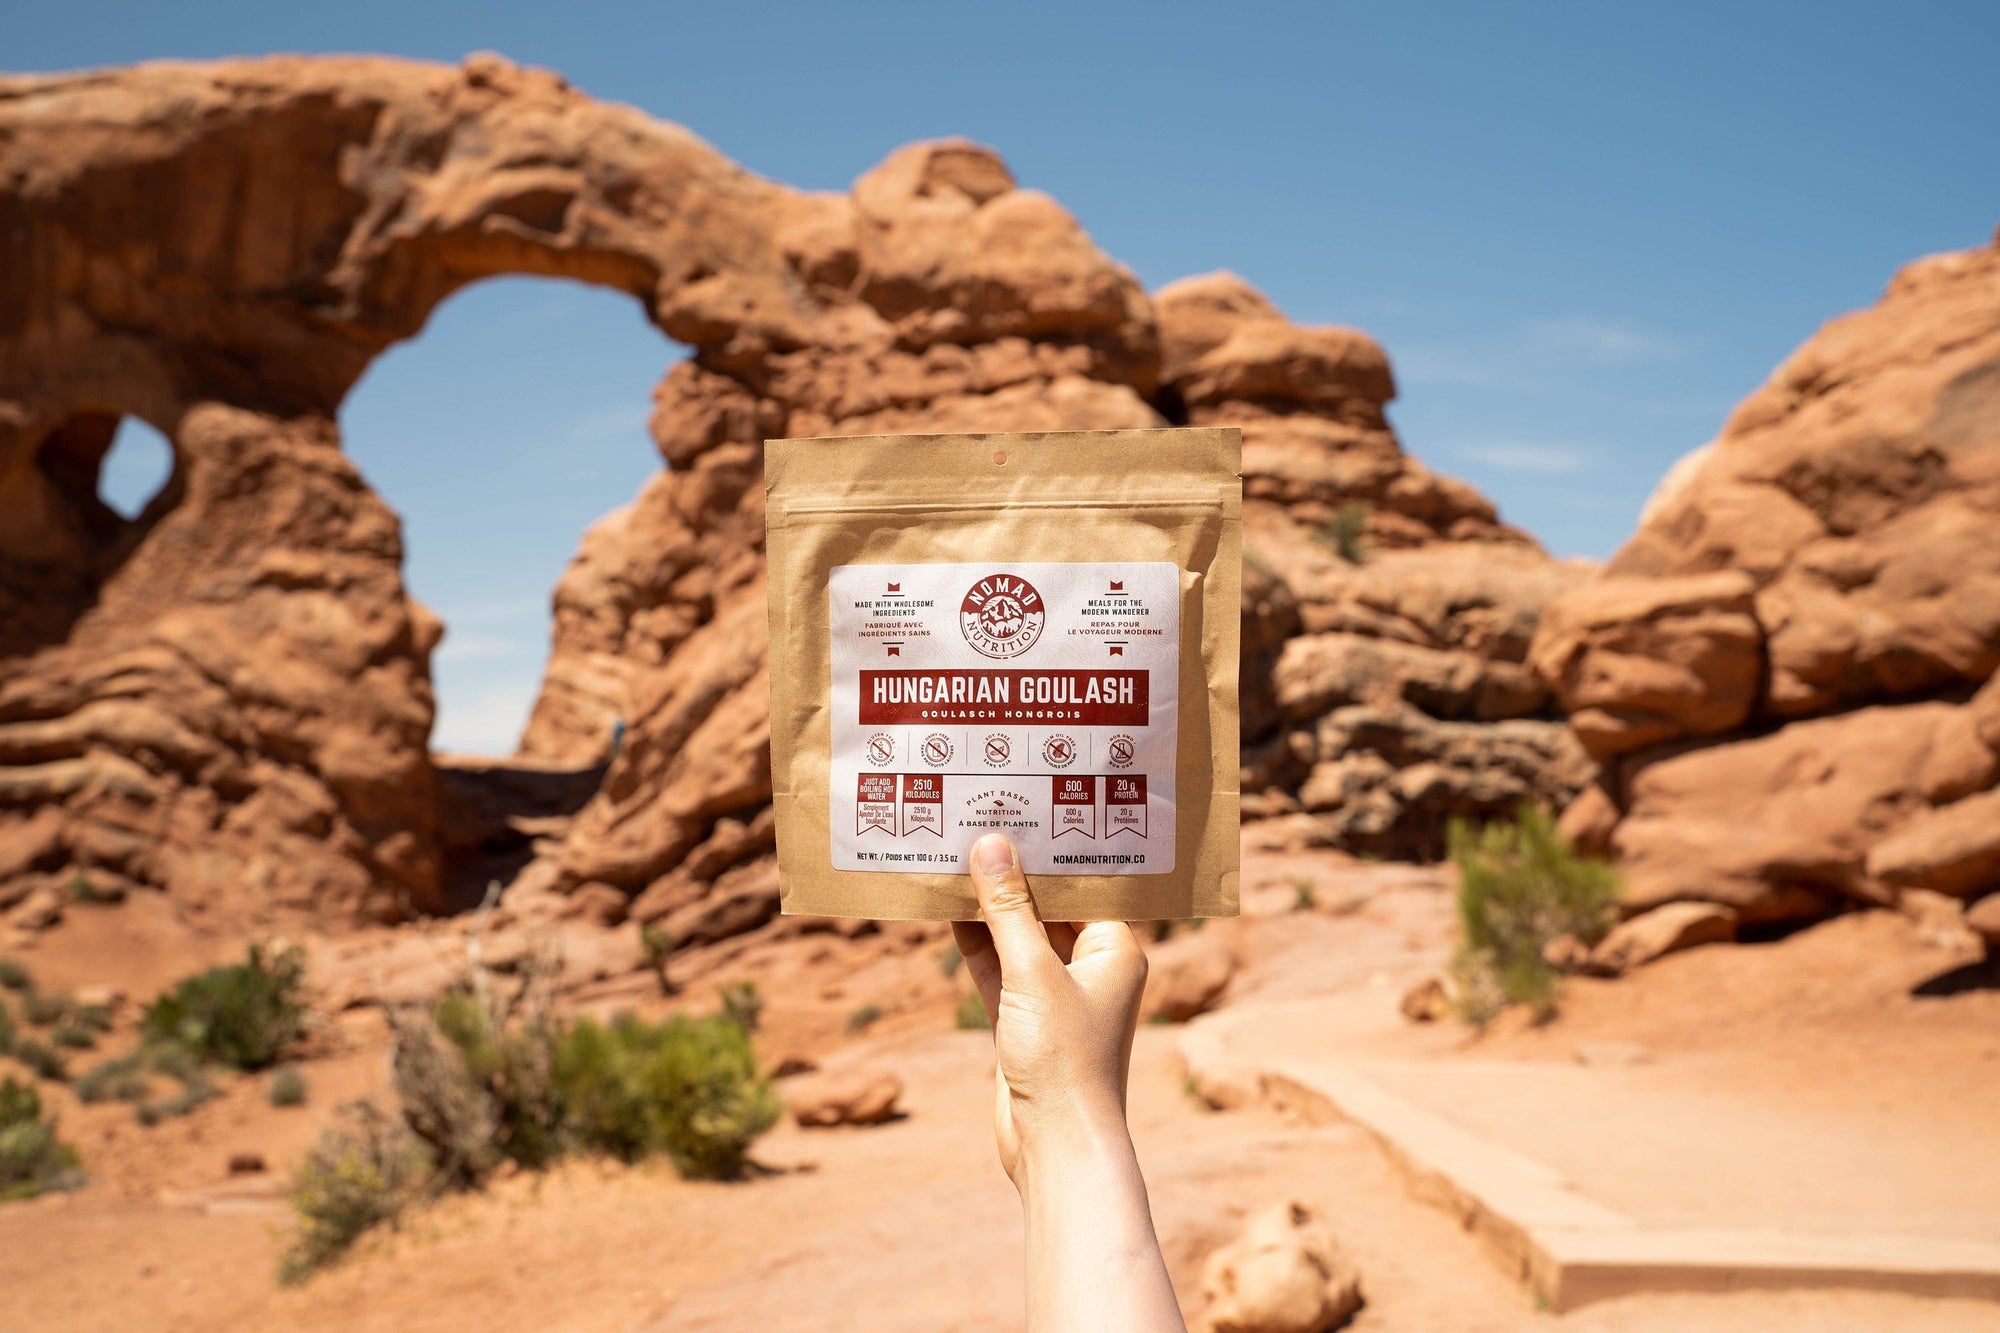 Nomad Nutrition Hungarian Goulash, vegan dehydrated adventure, camping, plant-based, gluten-free meal picture at Double Arch Trail, Arches National Park.